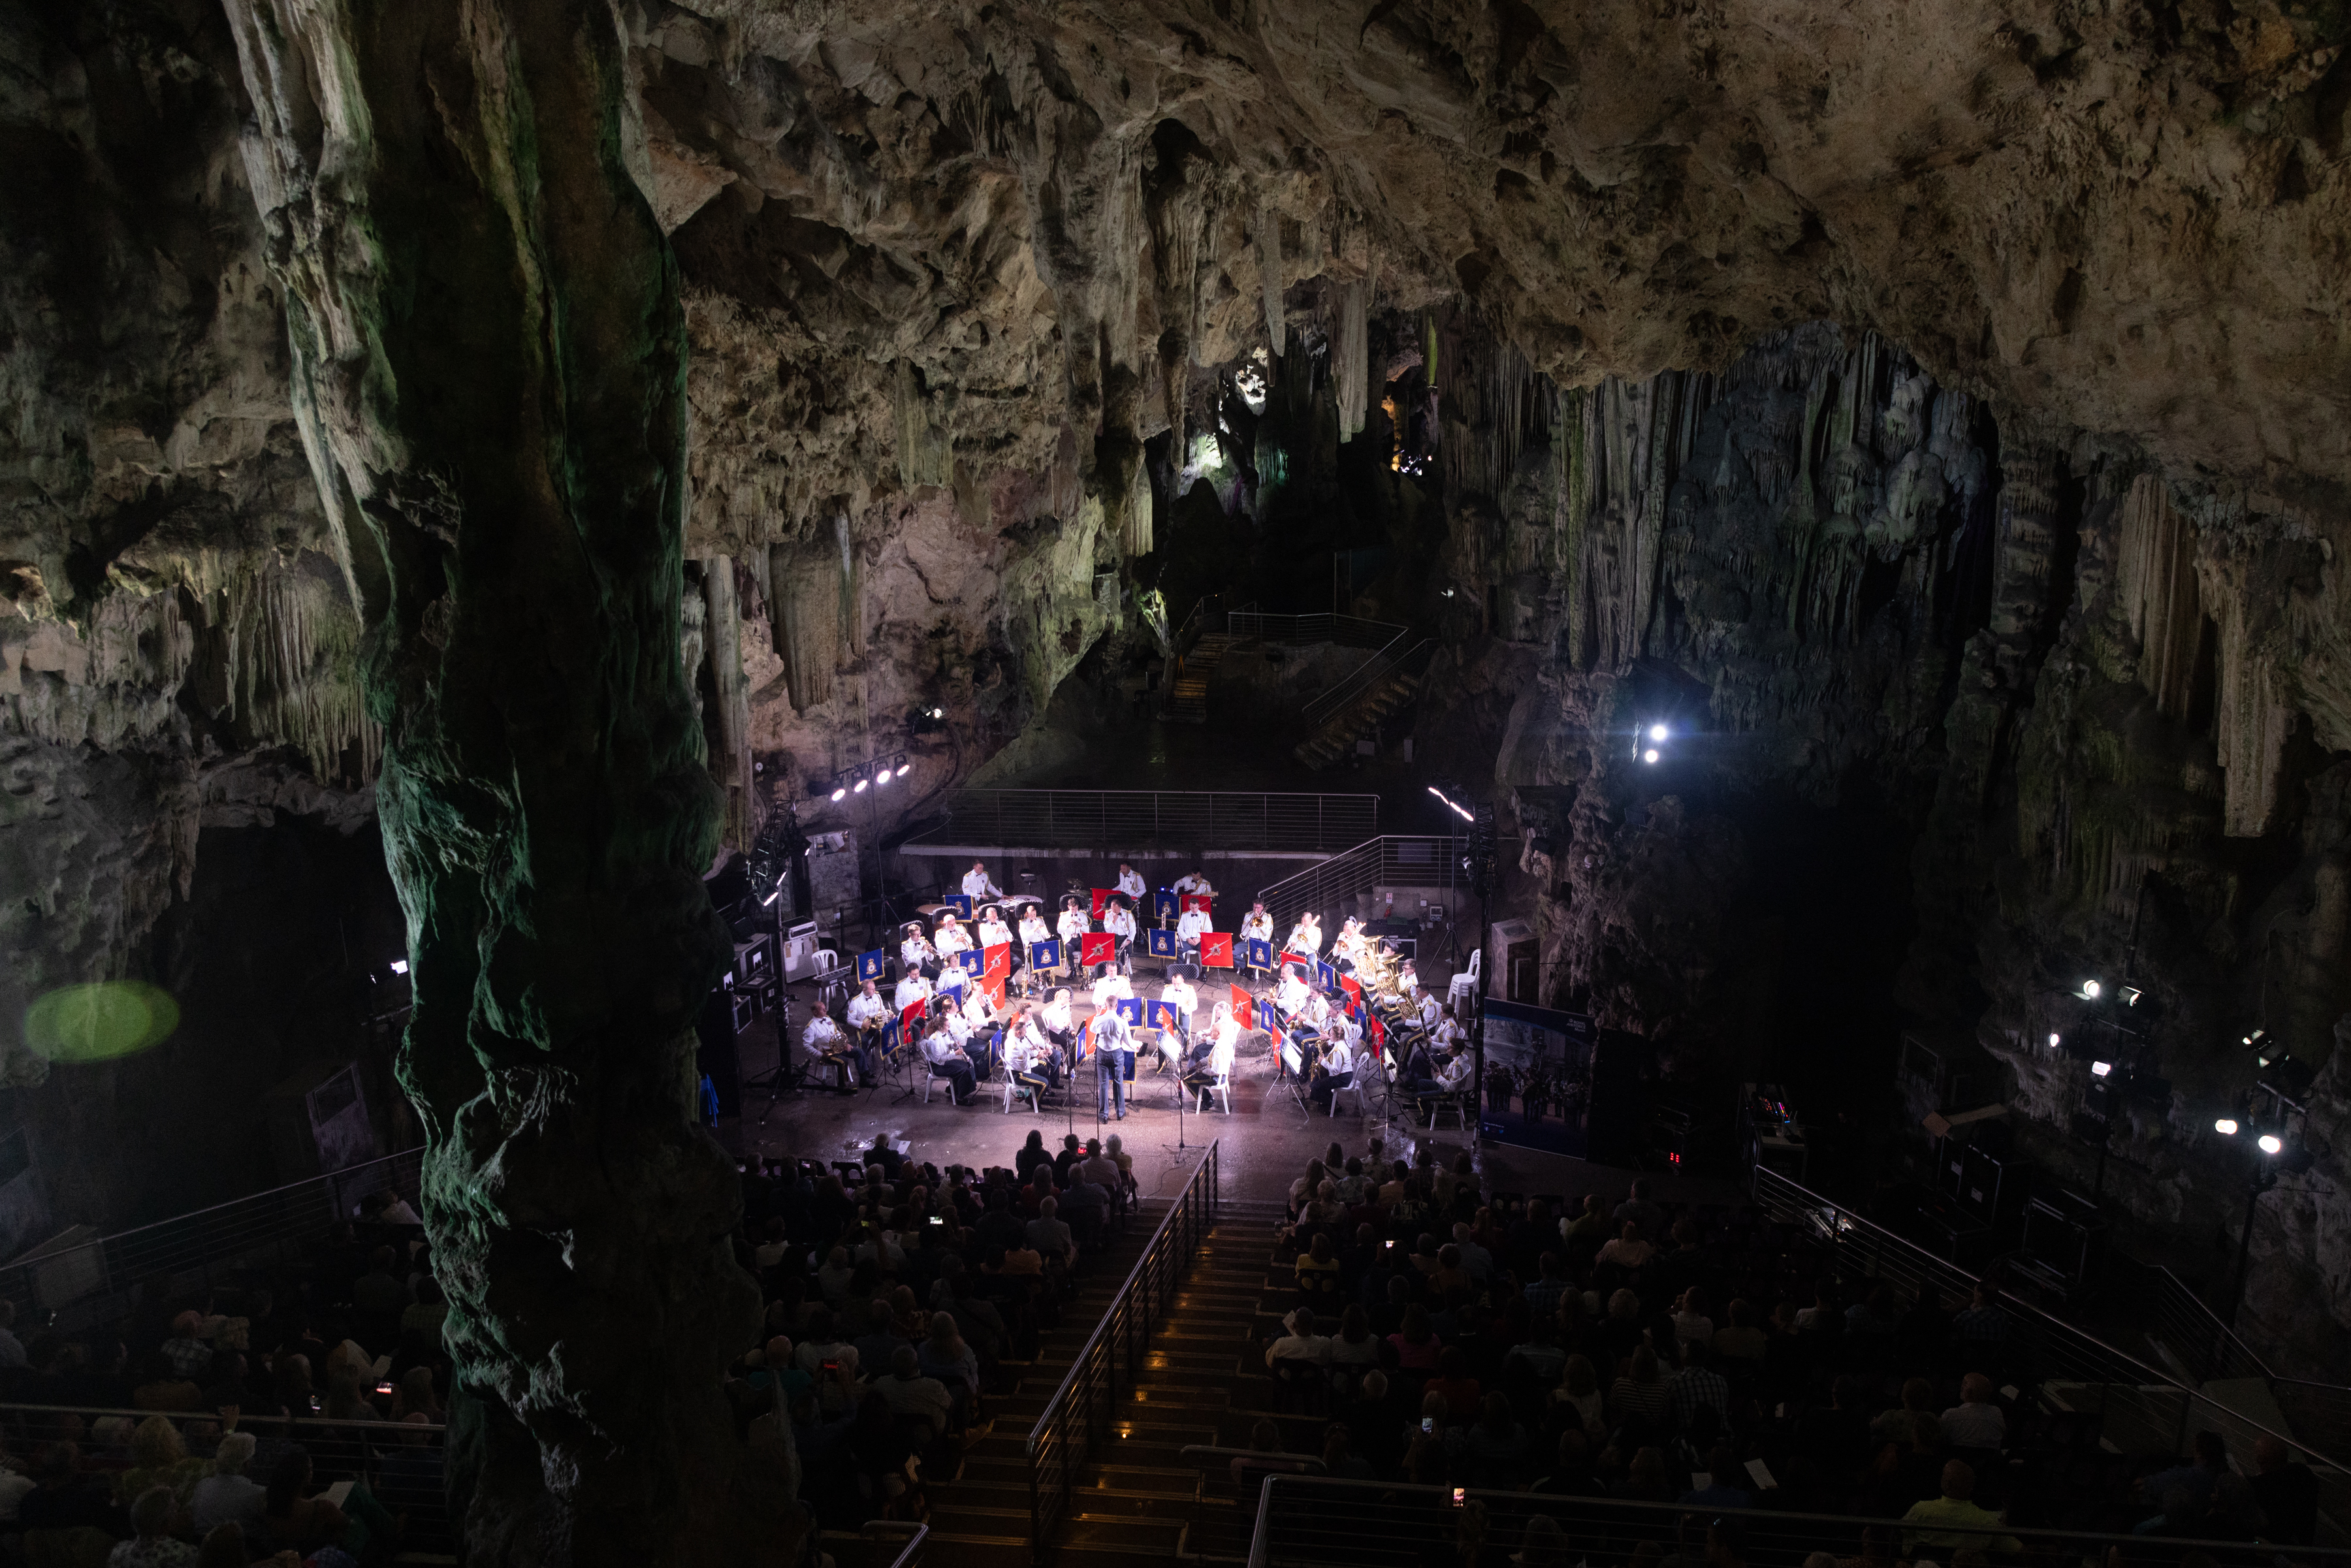 The Band of the RAF Regiment performing in St Michael's Cave.